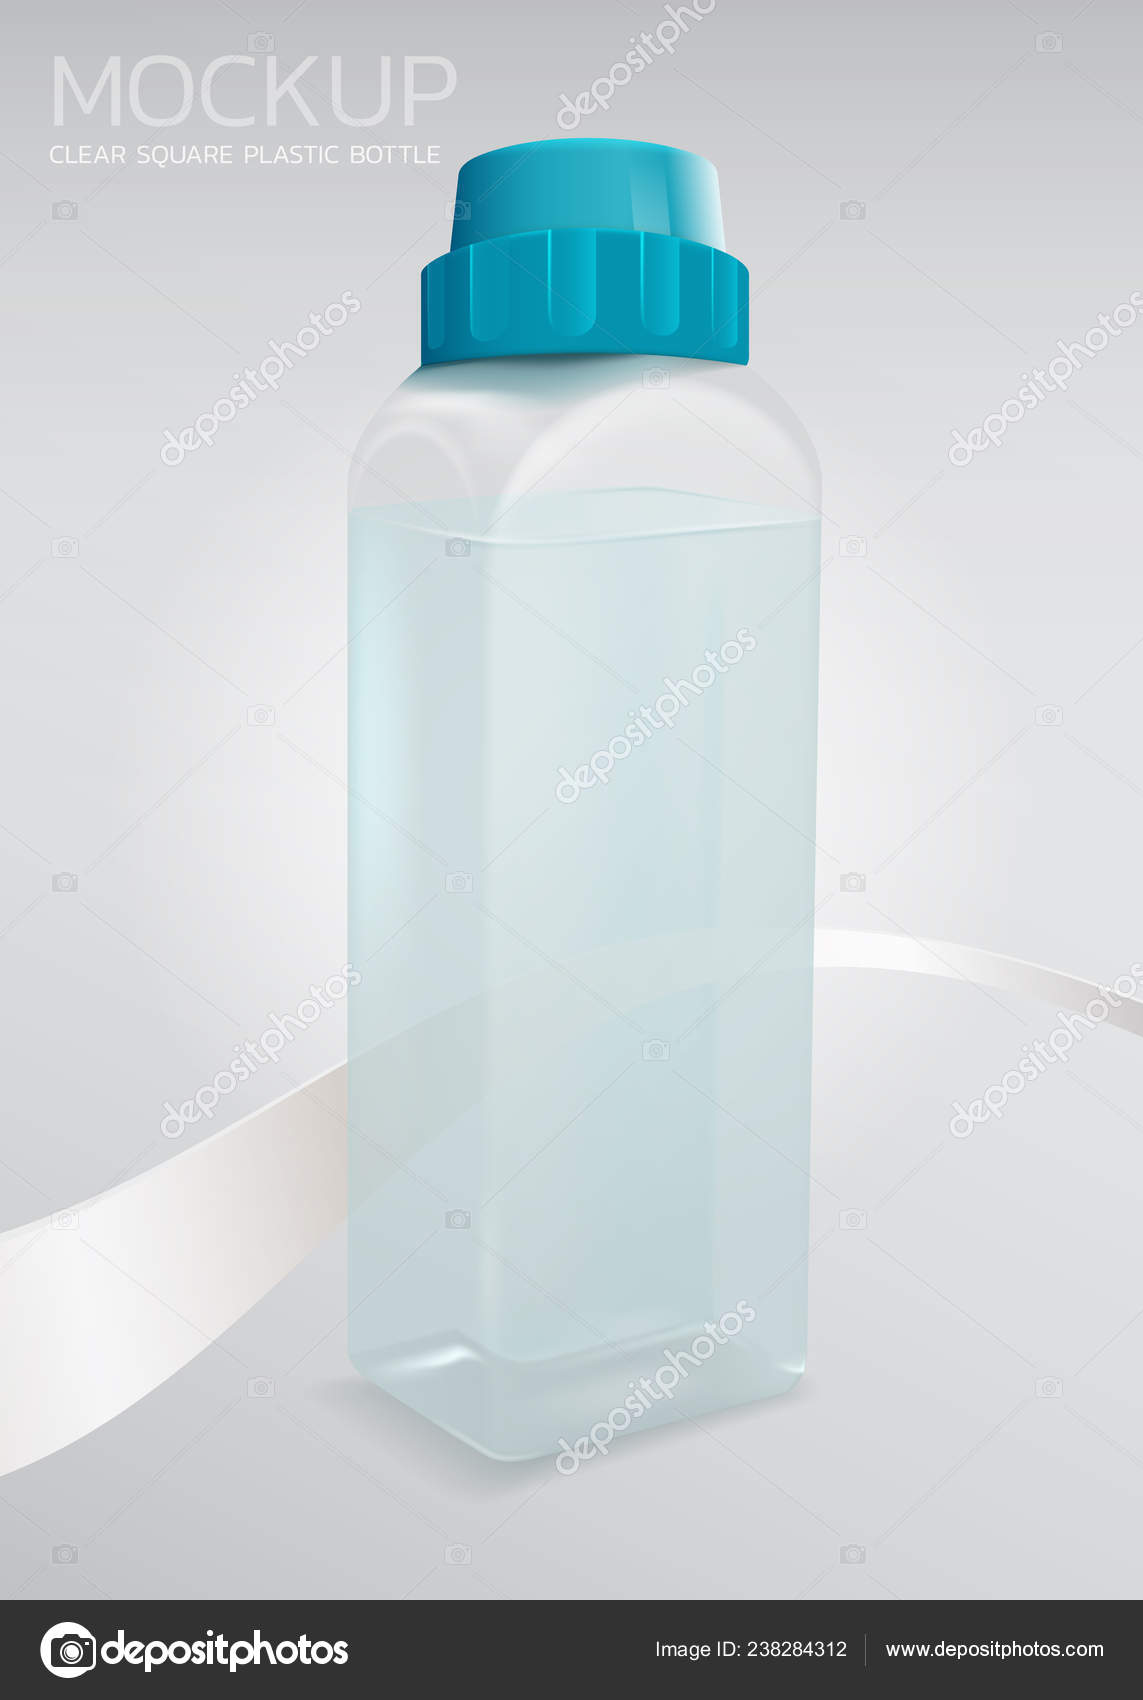 Download Realistic Clear Square Plastic Bottle Water Milk Packaging Vector Mock Vector Image By C Vectorman2017 Vector Stock 238284312